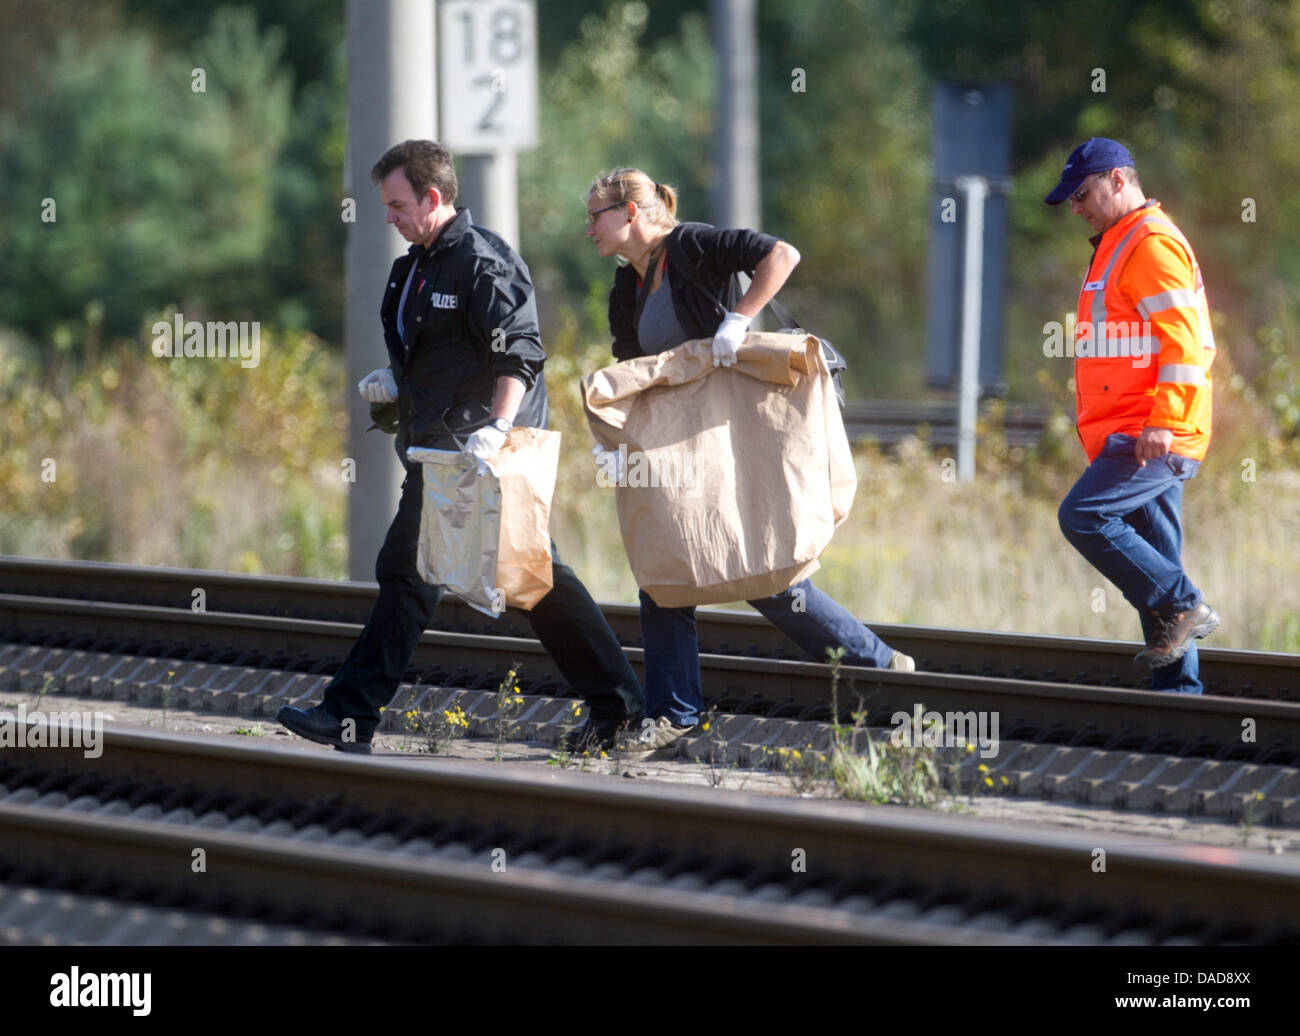 Police officers carry paper sacks with secured evidence on a stretch of railway in Berlin, Germany, 12 October 2011. Additional incediary devices were found near Berlin Staaken station. According to the police, one of the devices exploded a few days ago causing a signal malfunction, but the others did not explode. Photo: TOBIAS KLEINSCHMIDT Stock Photo